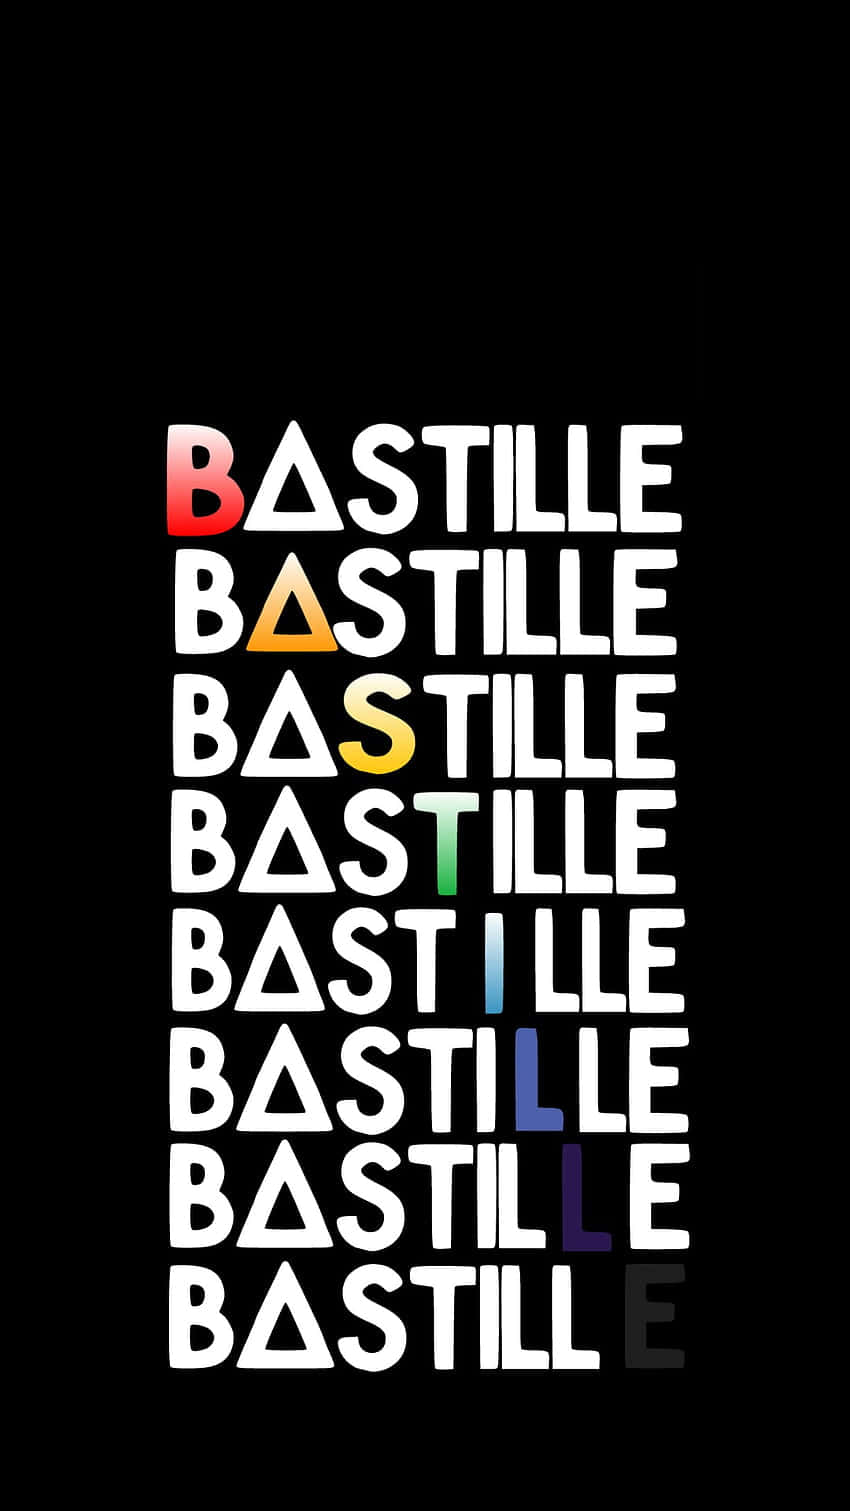 Download Bastille On A Bicycle Wallpaper | Wallpapers.com